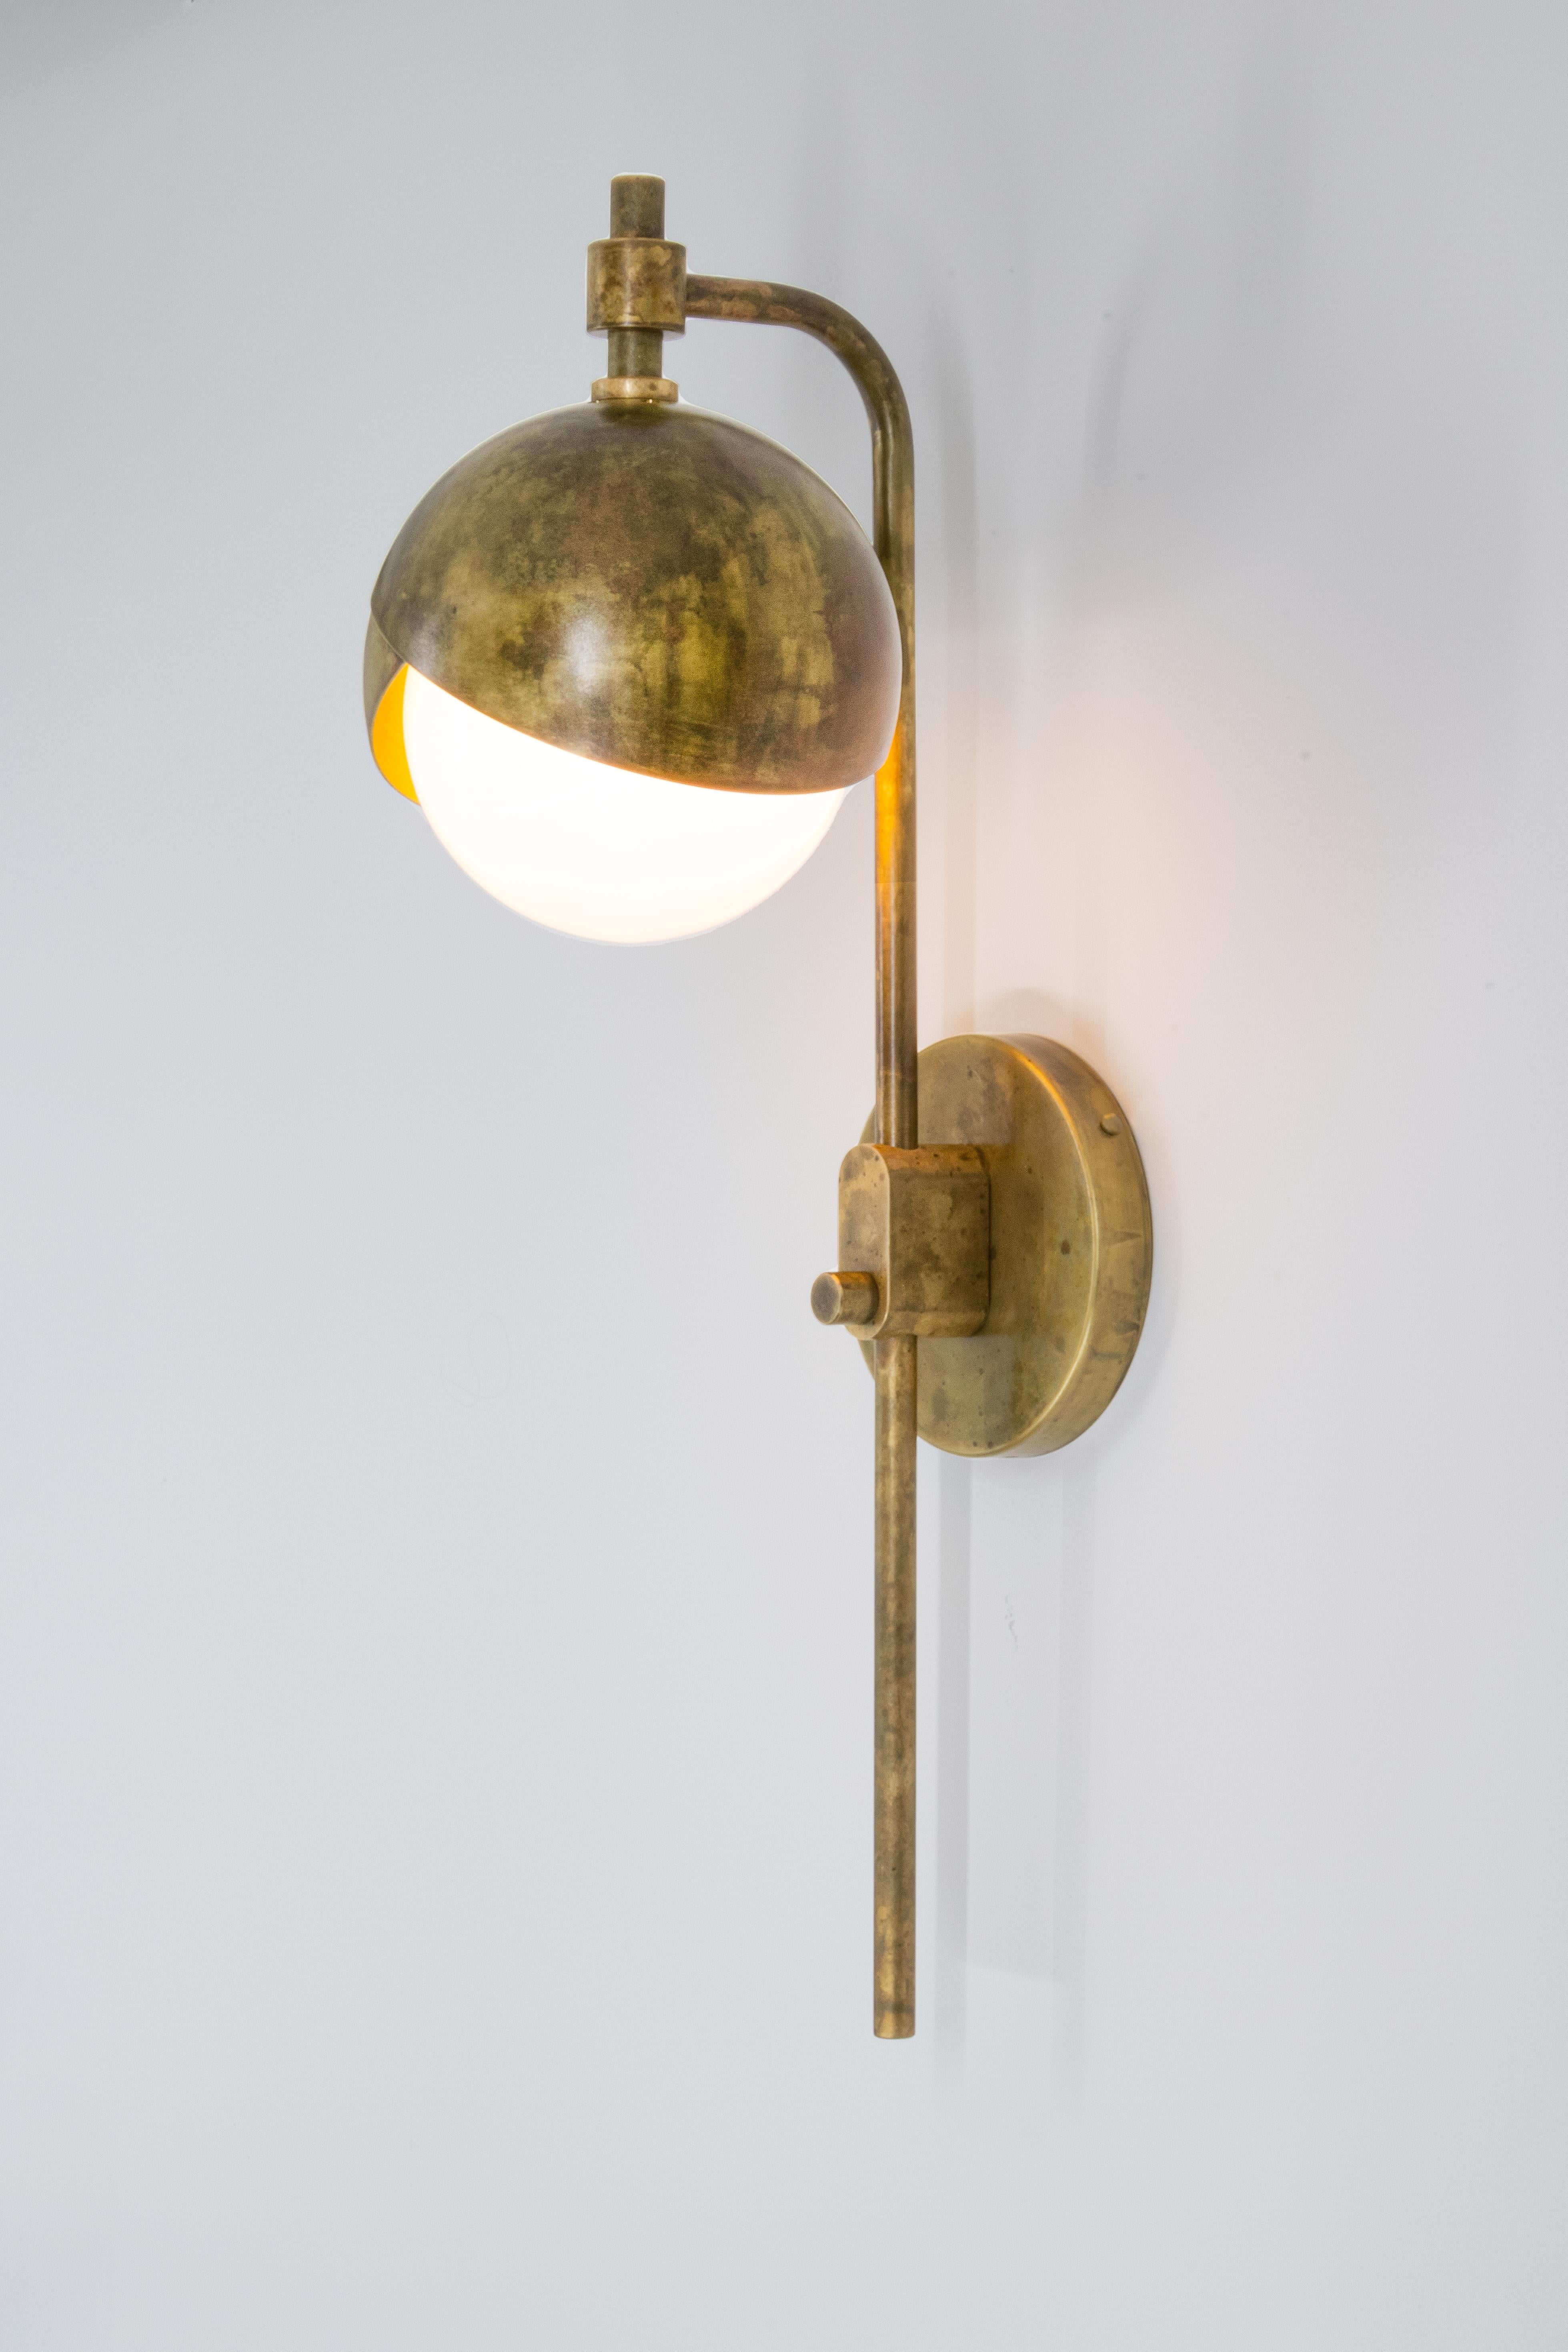 The Benedict™ drop sconce is designed for intimate settings such as a quiet reading space, breakfast nook, a home office, or as bedside mood lighting. With a knob located at its center it can be easily dimmed as desired.

Shown here in Trella’s™